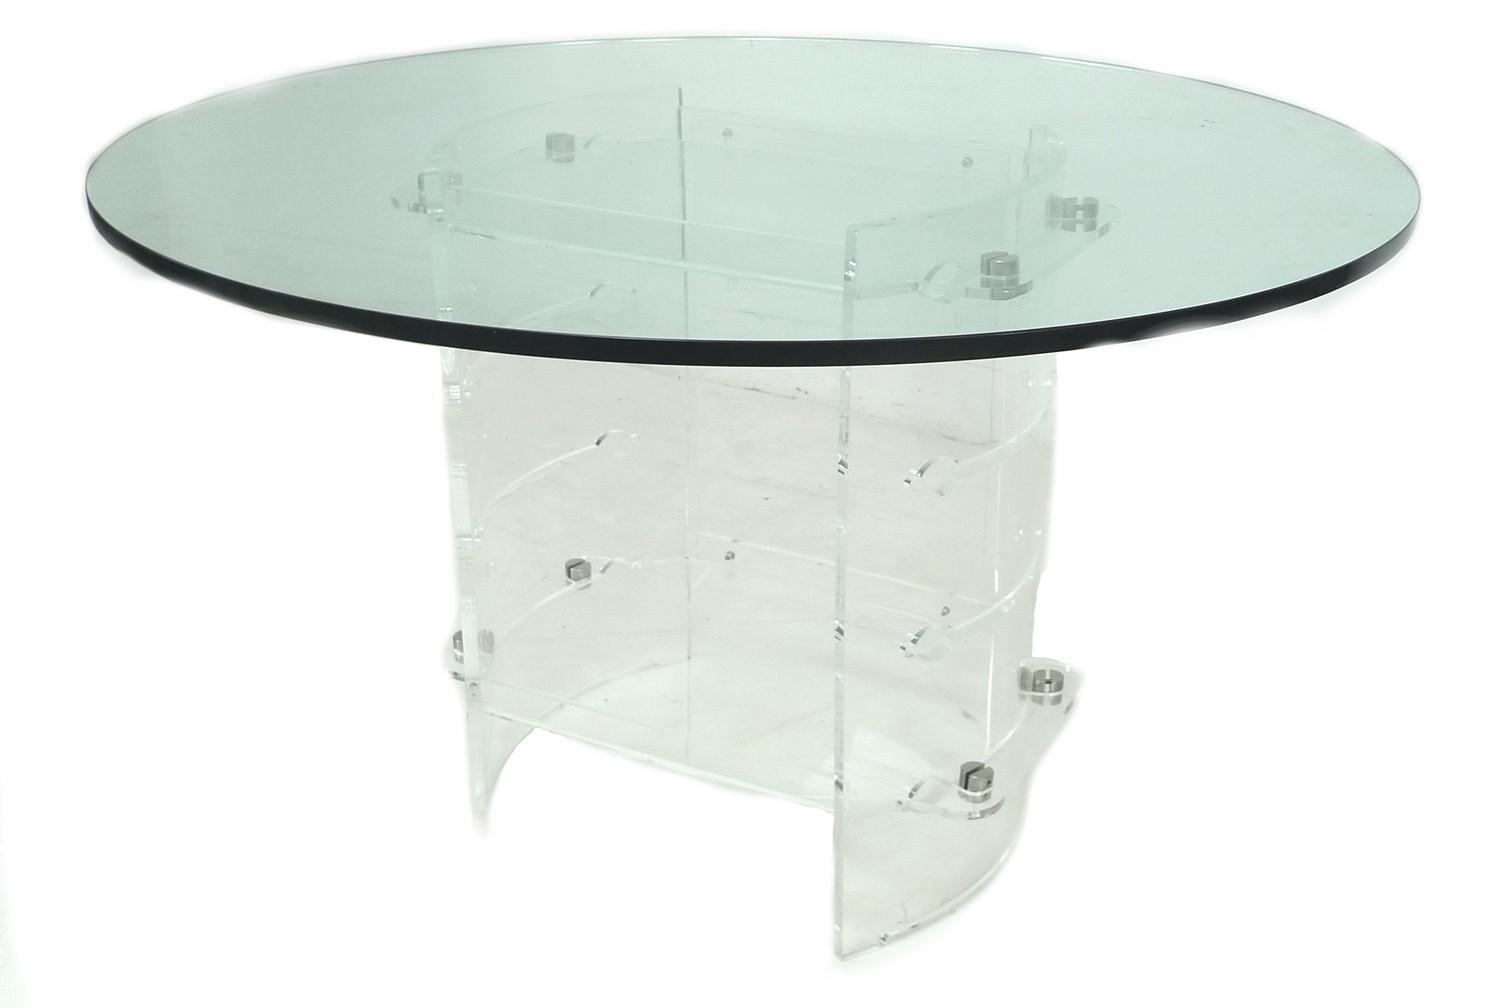 A modern design table, with circular surface and perspex base, 122 by 122 by 73.5cm high.